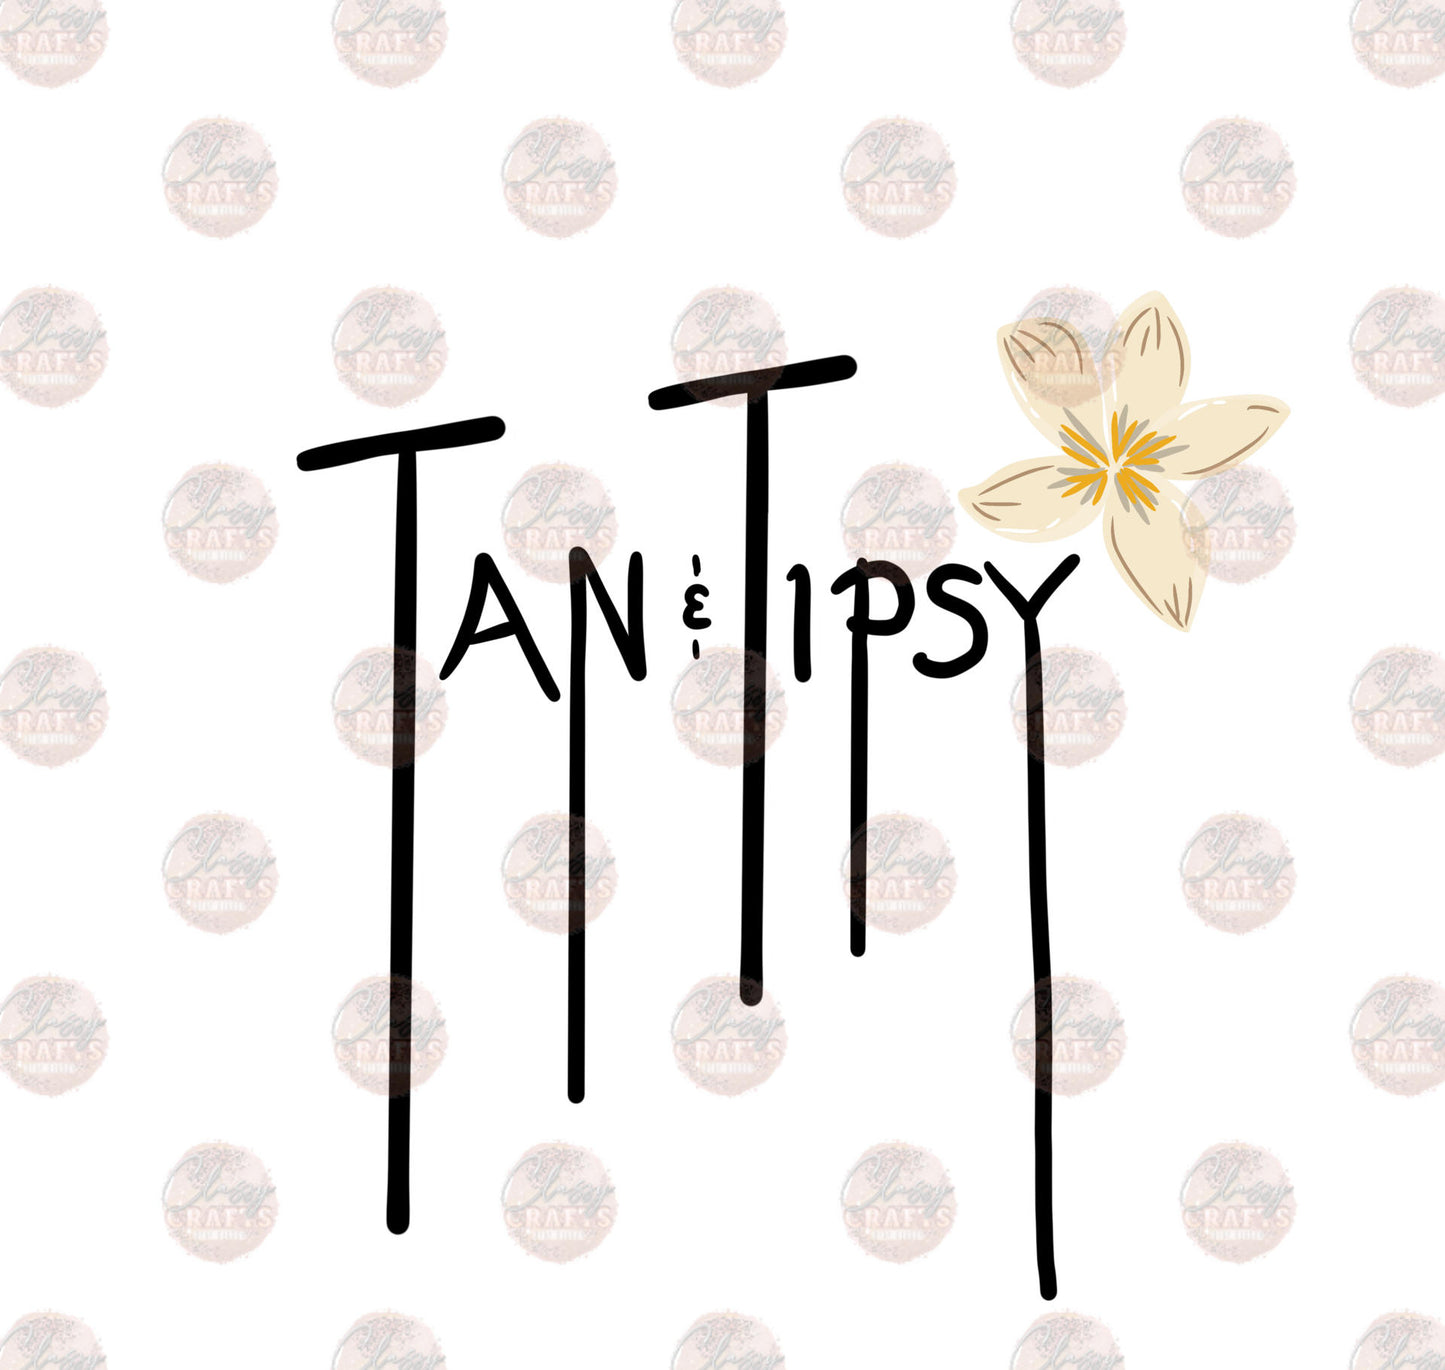 Tan & Tipsy with Flower - Sublimation Transfer